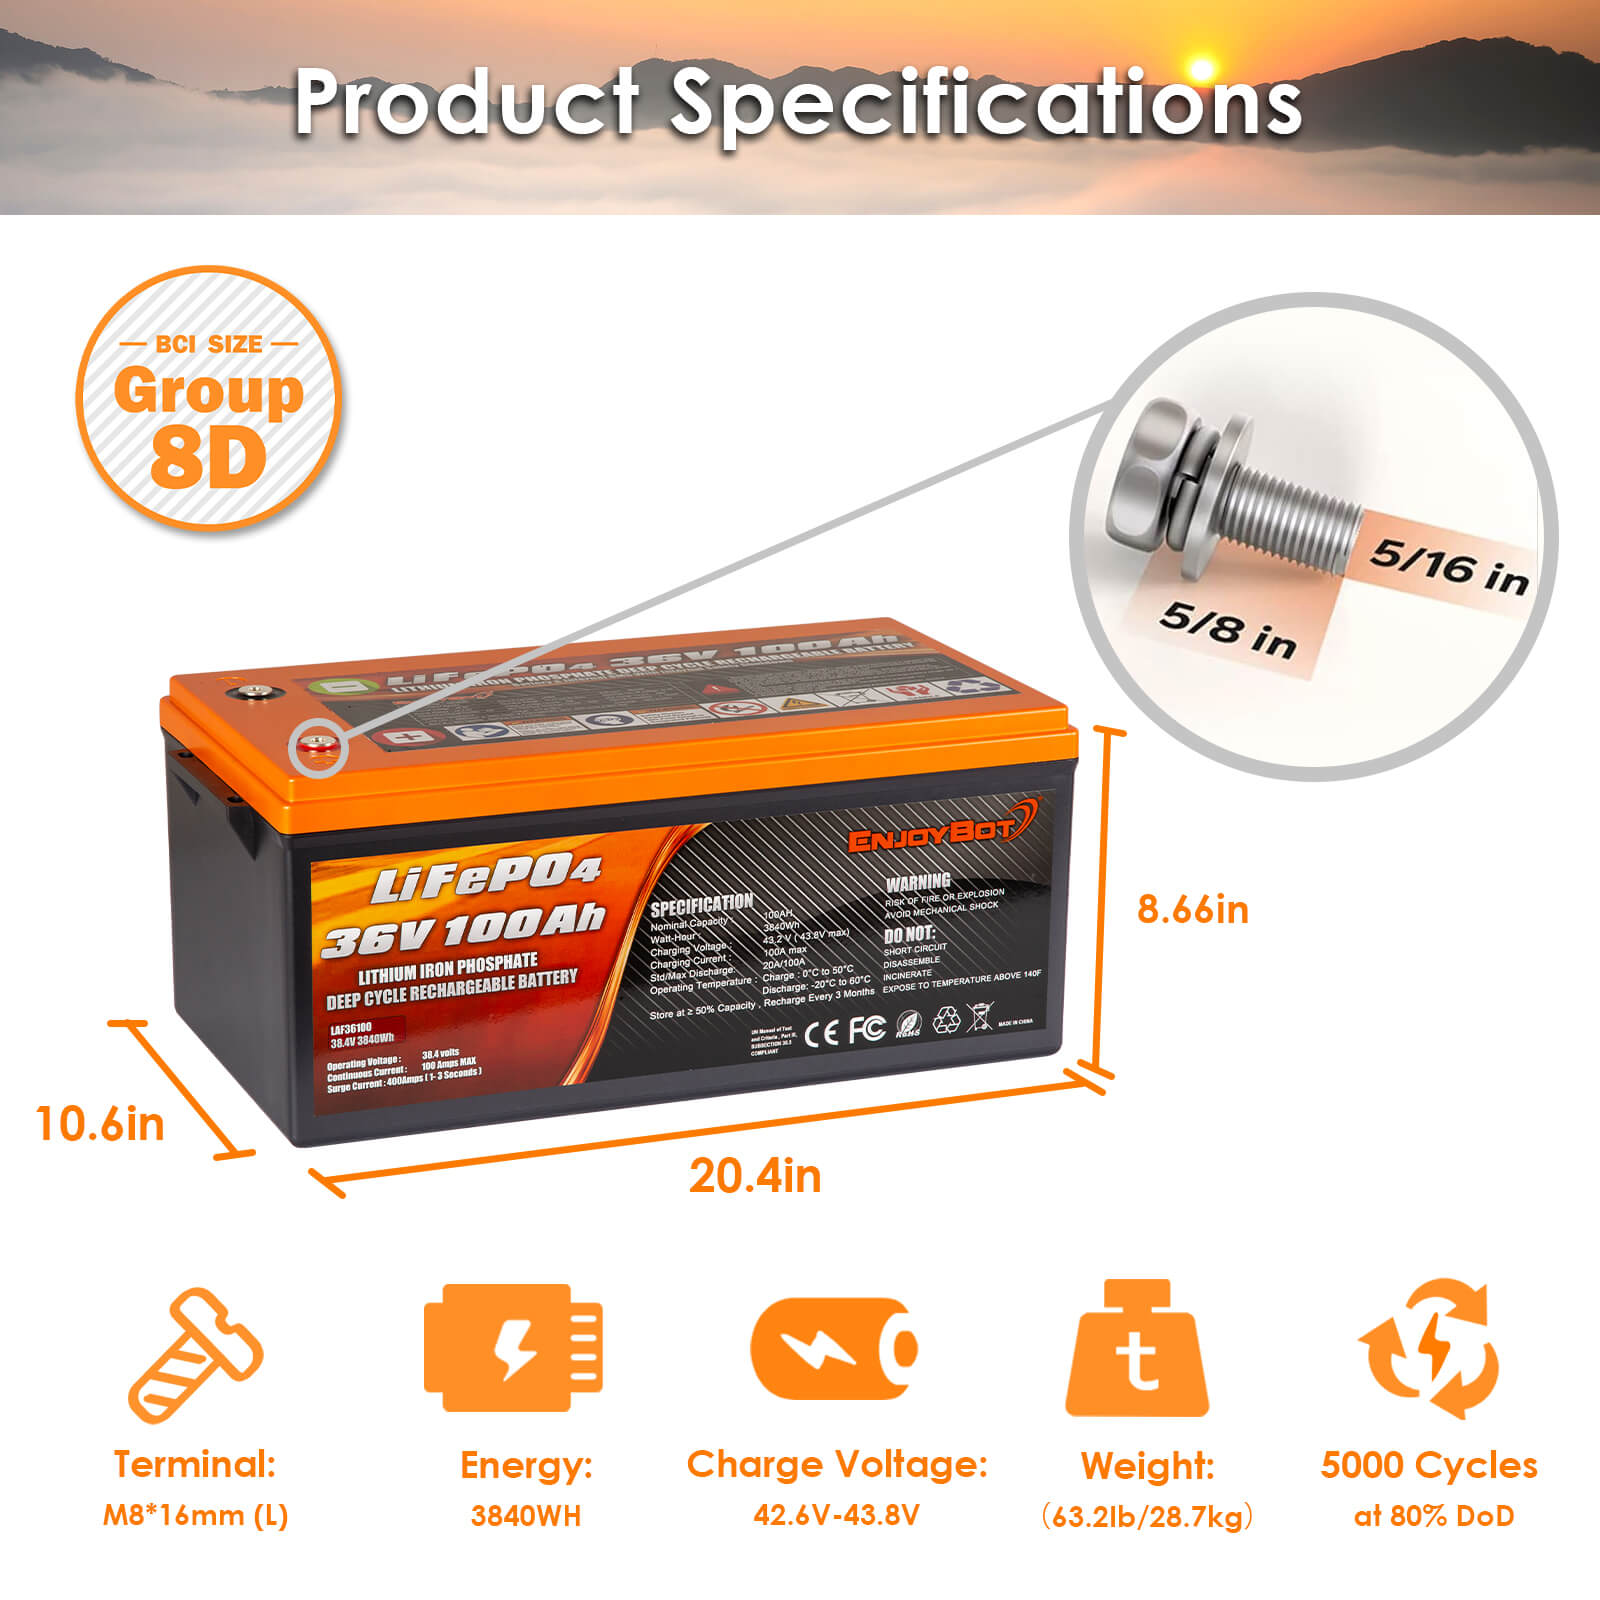 ENJOYBOT Bluetooth 36V 100AH 3840Wh Smart Lithium Battery High & Low Temp Protection Deep Cycle Rechargeable - Peak Current 500A Perfect For Golf Cart/Trolling Motor